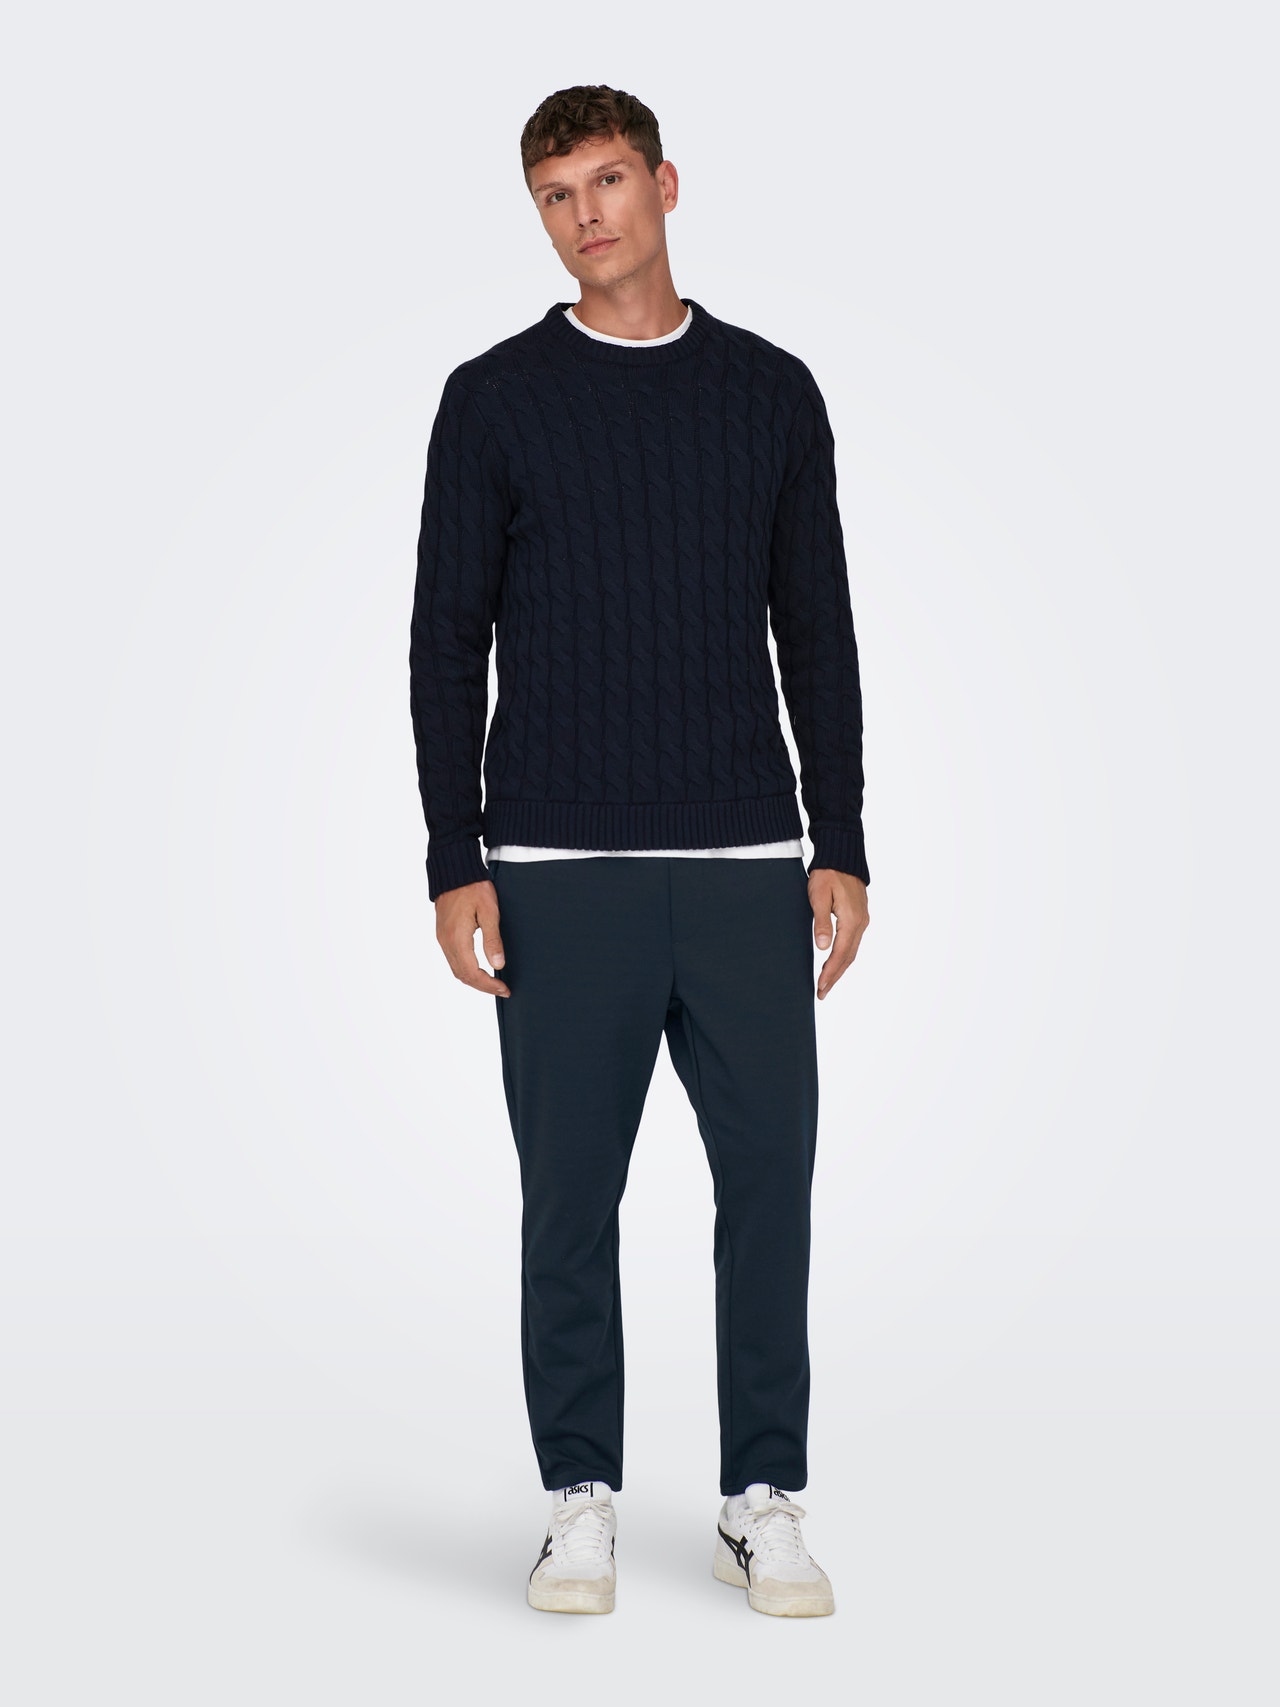 ONLY & SONS Tapered fit - Cropped Mid waist Drawstring hems Trousers -Dark Navy - 22022454